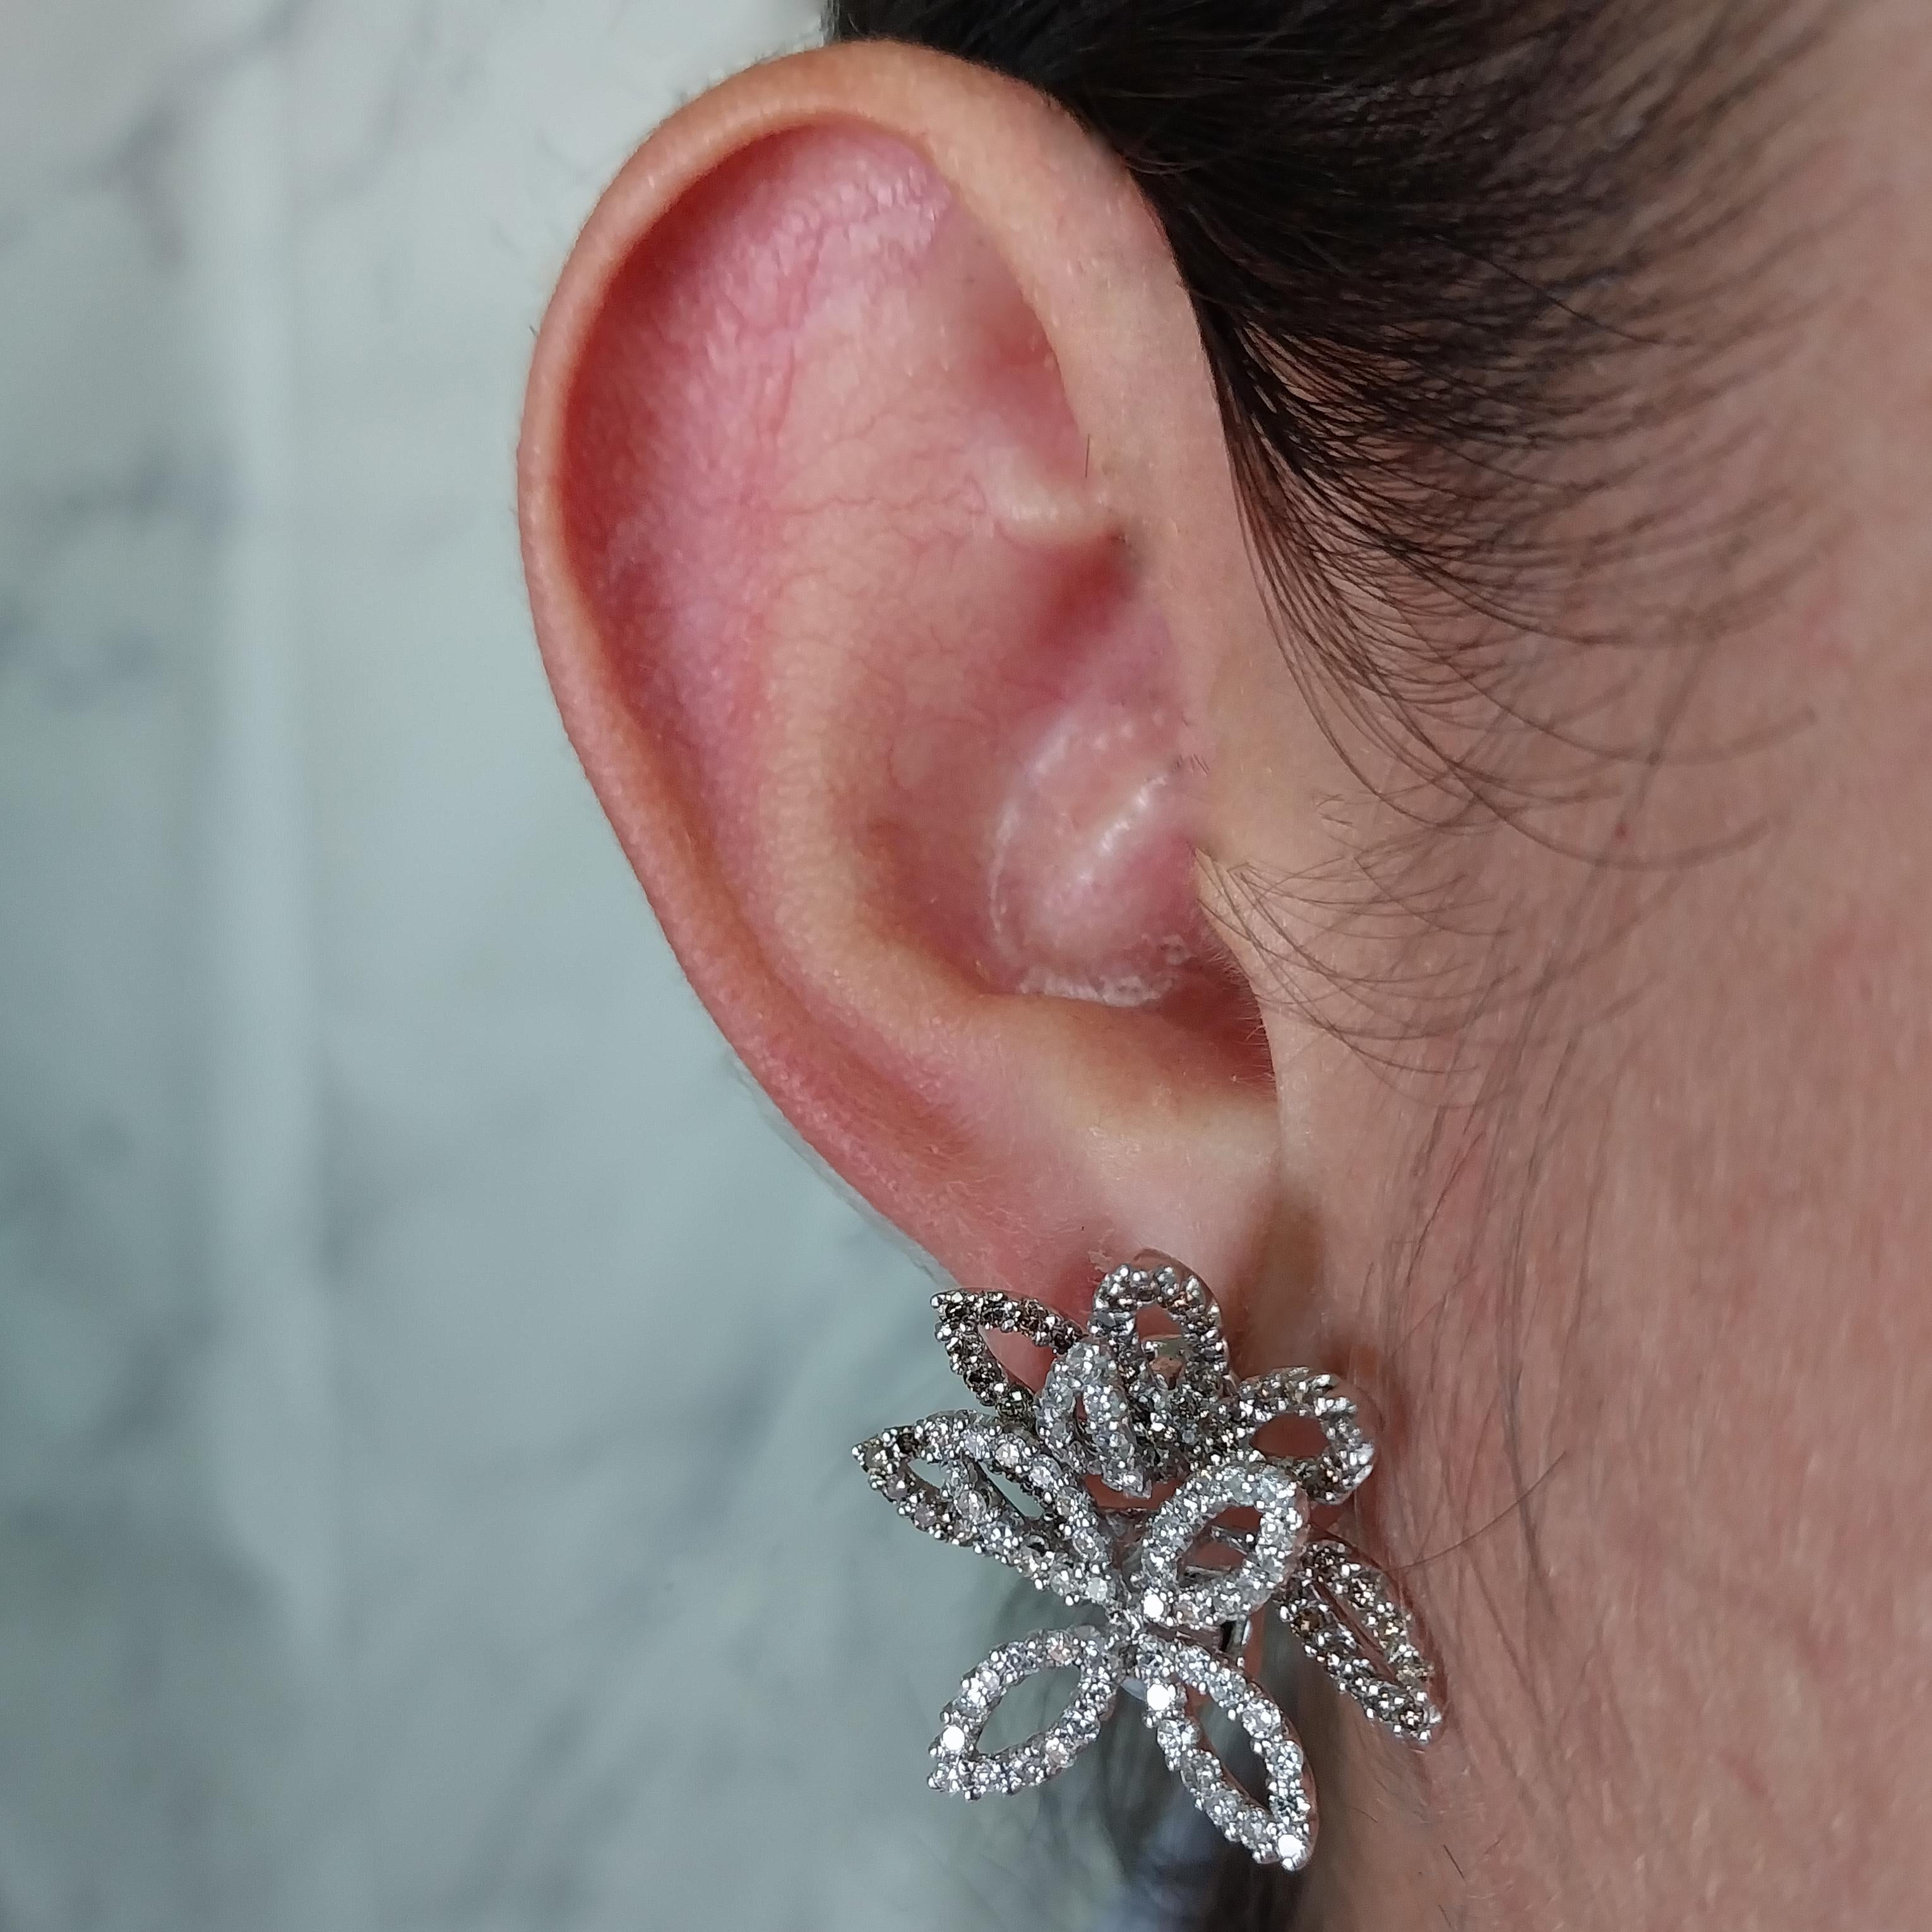 18 Karat White Gold Three Dimensional Flower Earrings Featuring 236 Round Brilliant Cut Diamonds of SI Clarity with Both H Color and Light Brown Color, Totaling Approximately 2.00 Carats. Pierced Post with Omega Clip Back. Finished Weight is 14.0